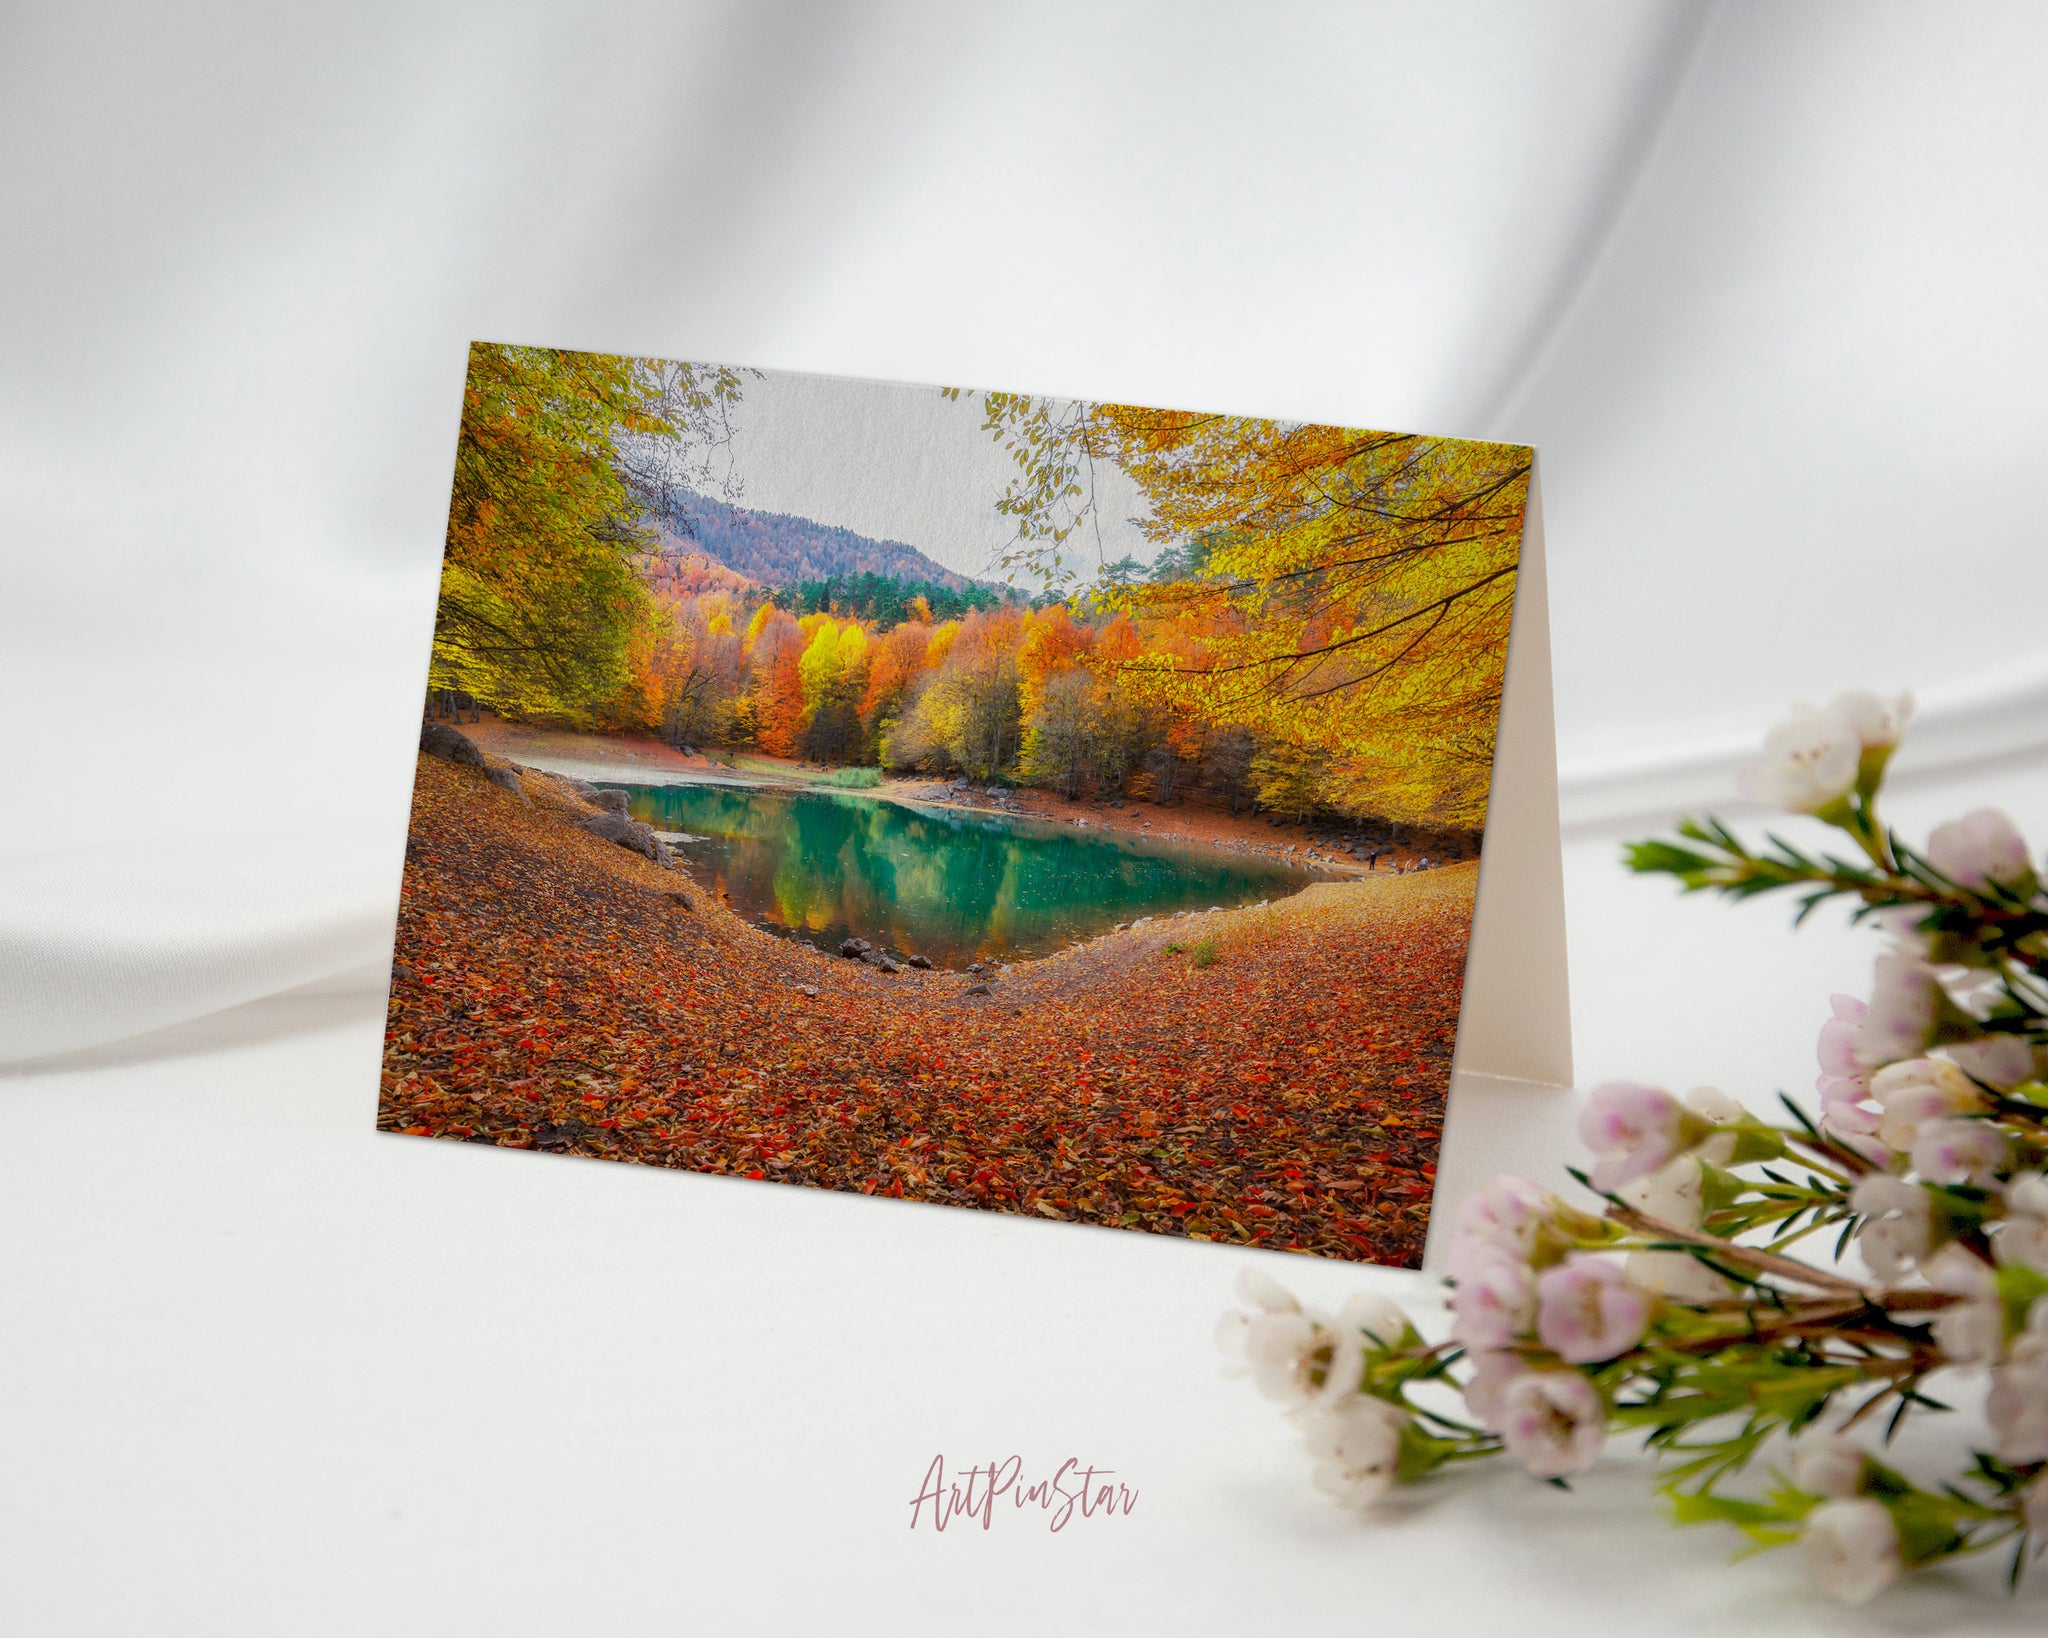 Autumn Colorful Leaves National Park Lake Magnificent Yedigoller, Bolu, Istanbul, Turkey Landscape Pattern Greeting Cards